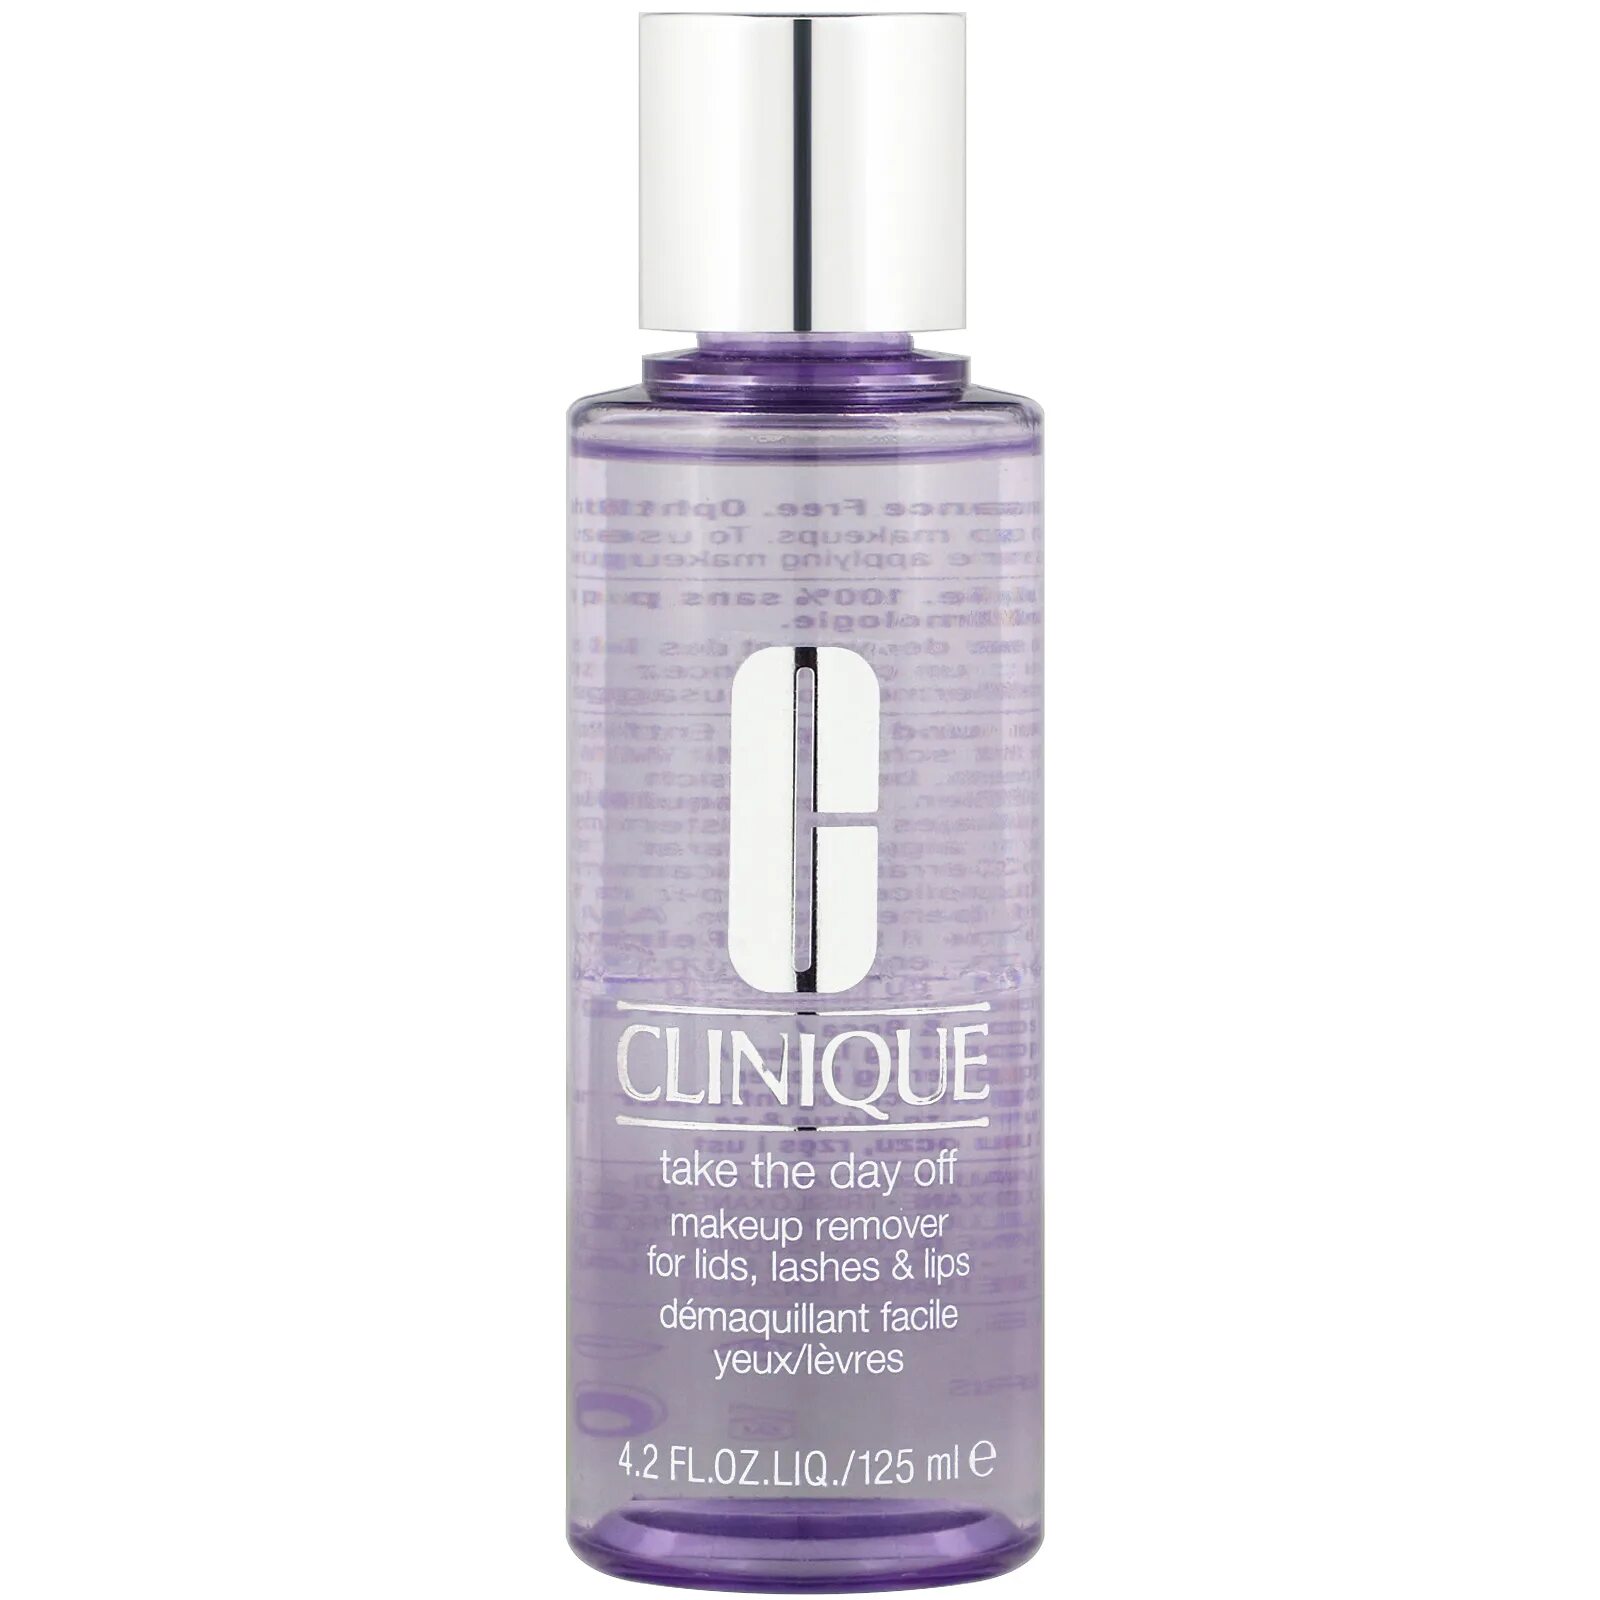 Clinique take the Day off Makeup Remover for Lids Lashes. Clinique take the Day off Makeup Remover. Take the Day off Makeup Remover for Lids, Lashes & Lips. Clinique take the Day off 200 ml. Take the day off cleansing